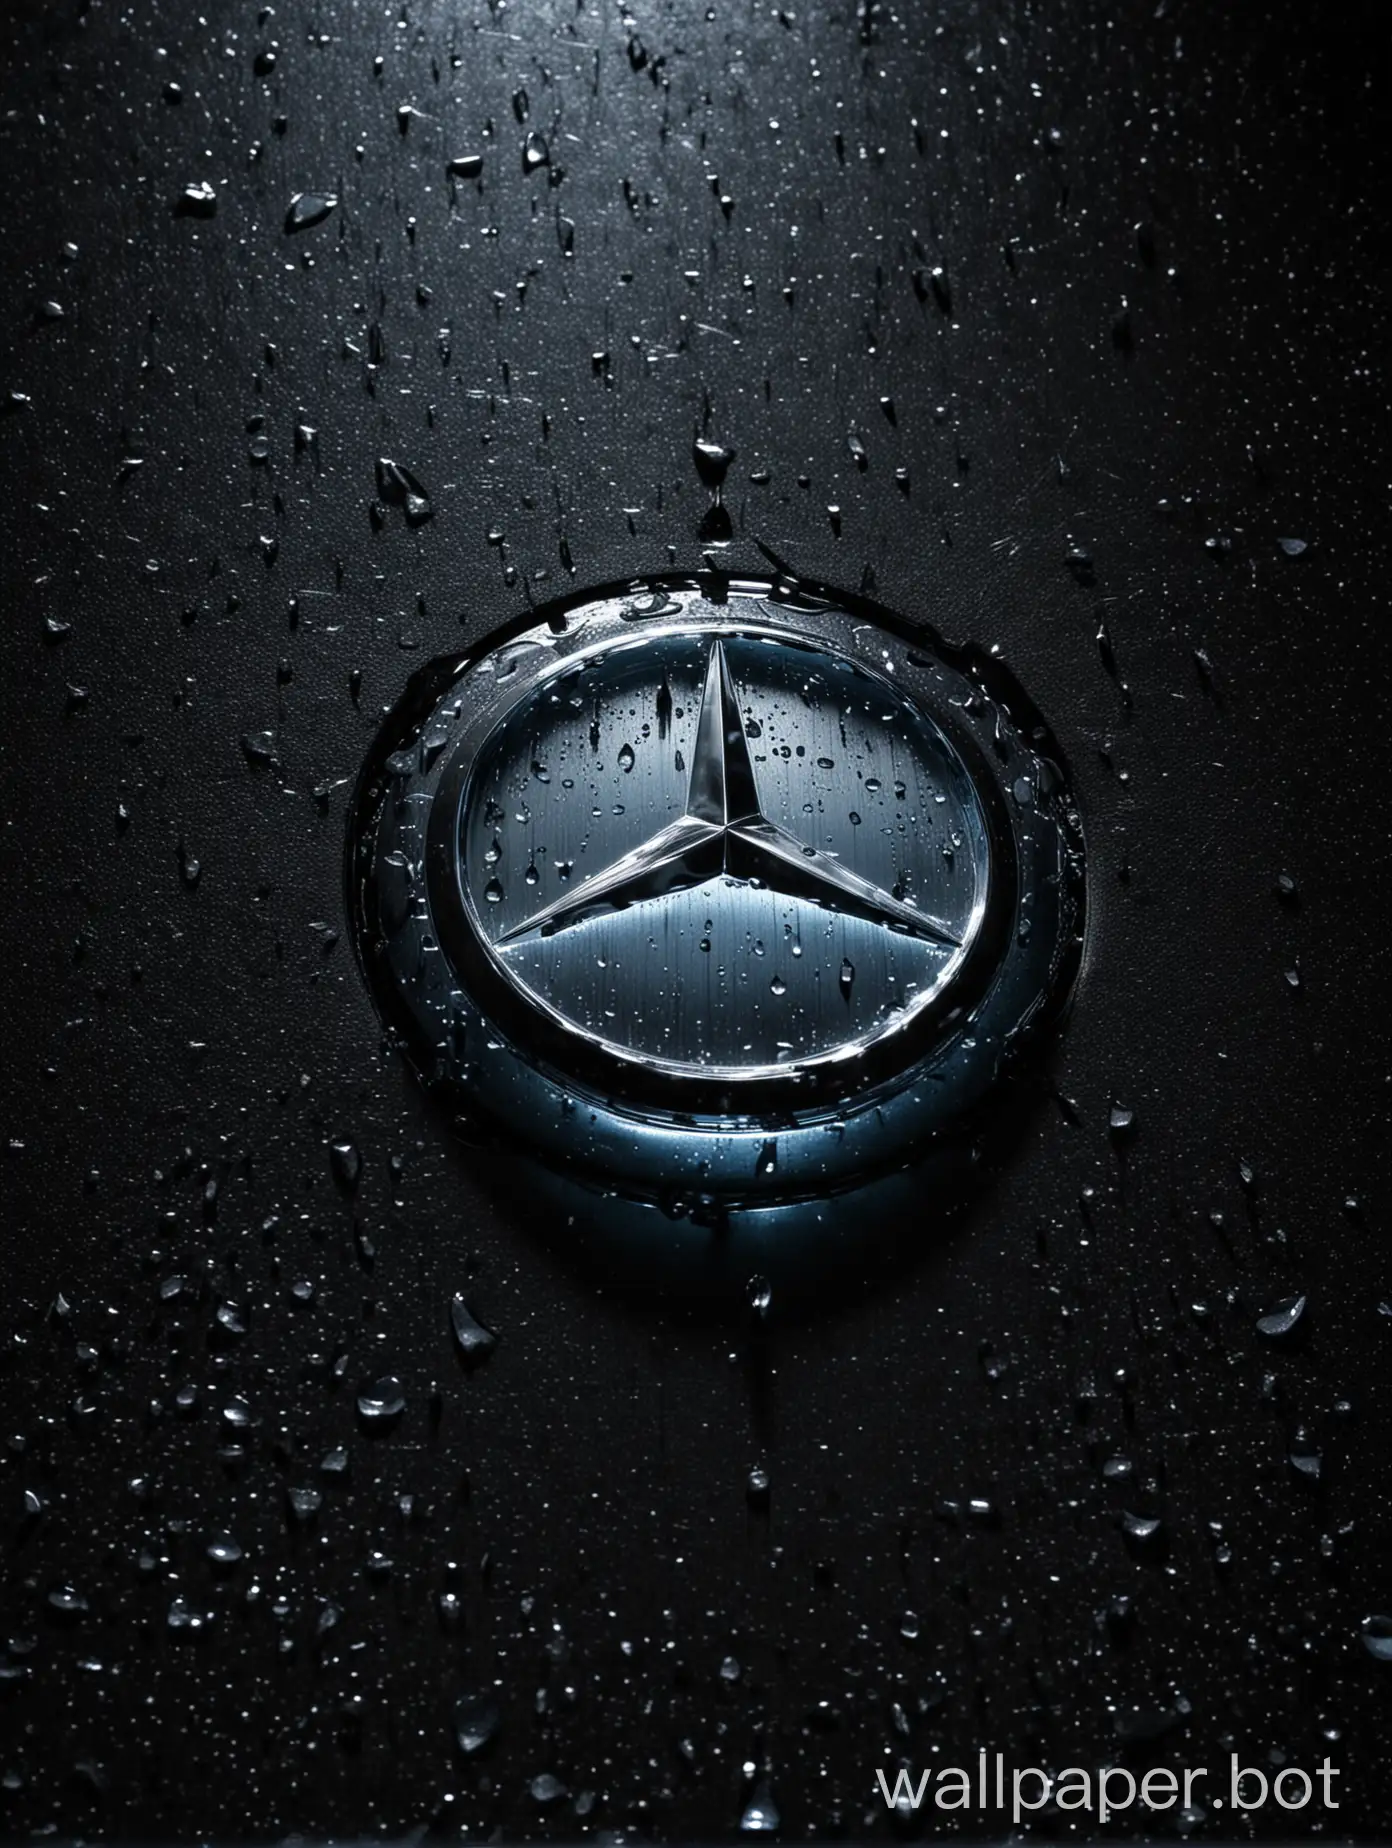 Mercedes logo on night with some light on it along with water drops.